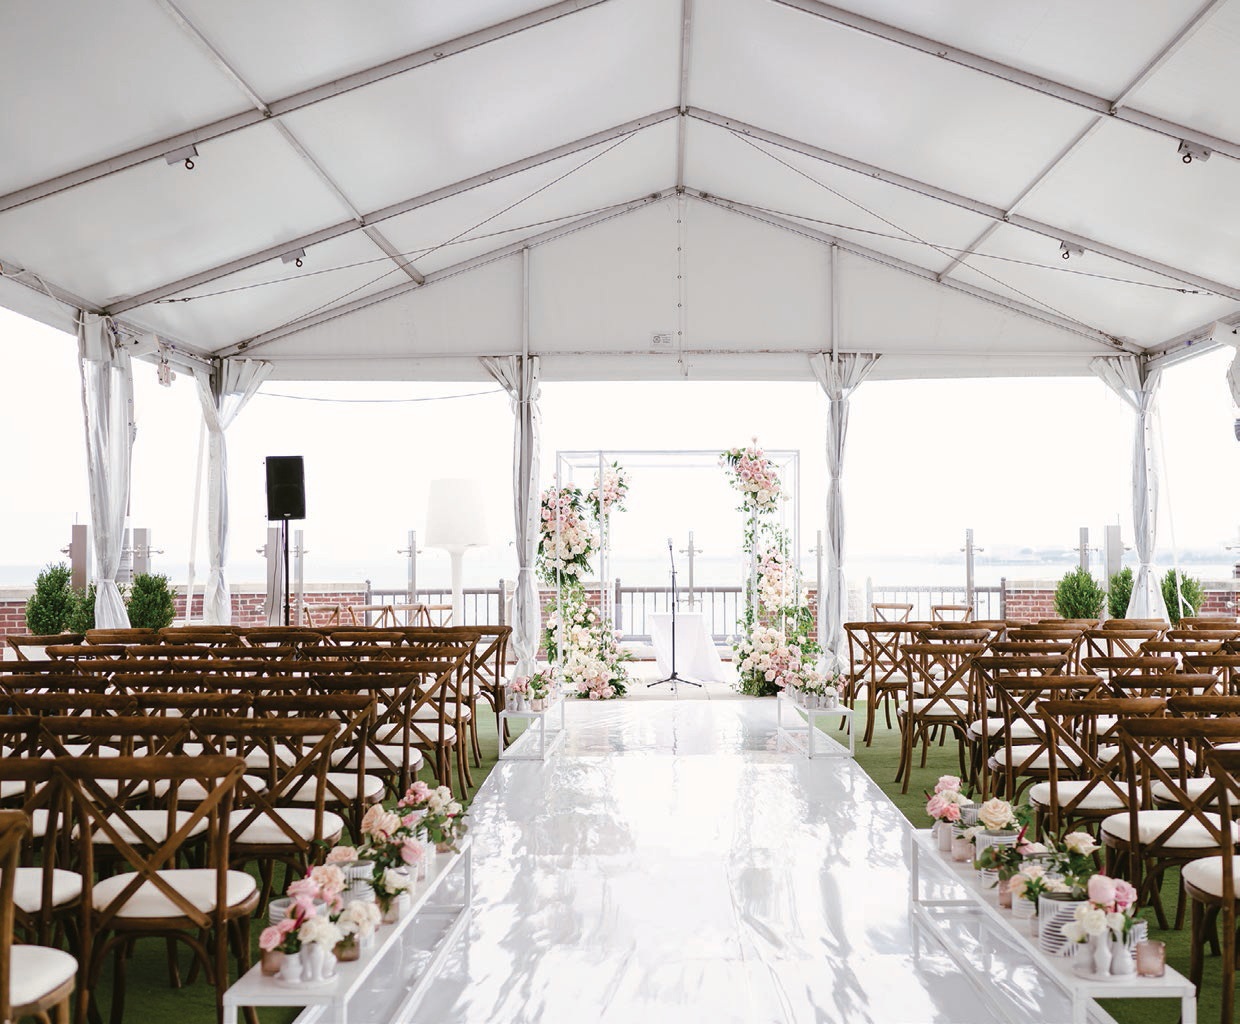 Both dance floor and aisle were covered with white latex “to make them
really glisten,” says the bride Photographed by Connie Marina Photography